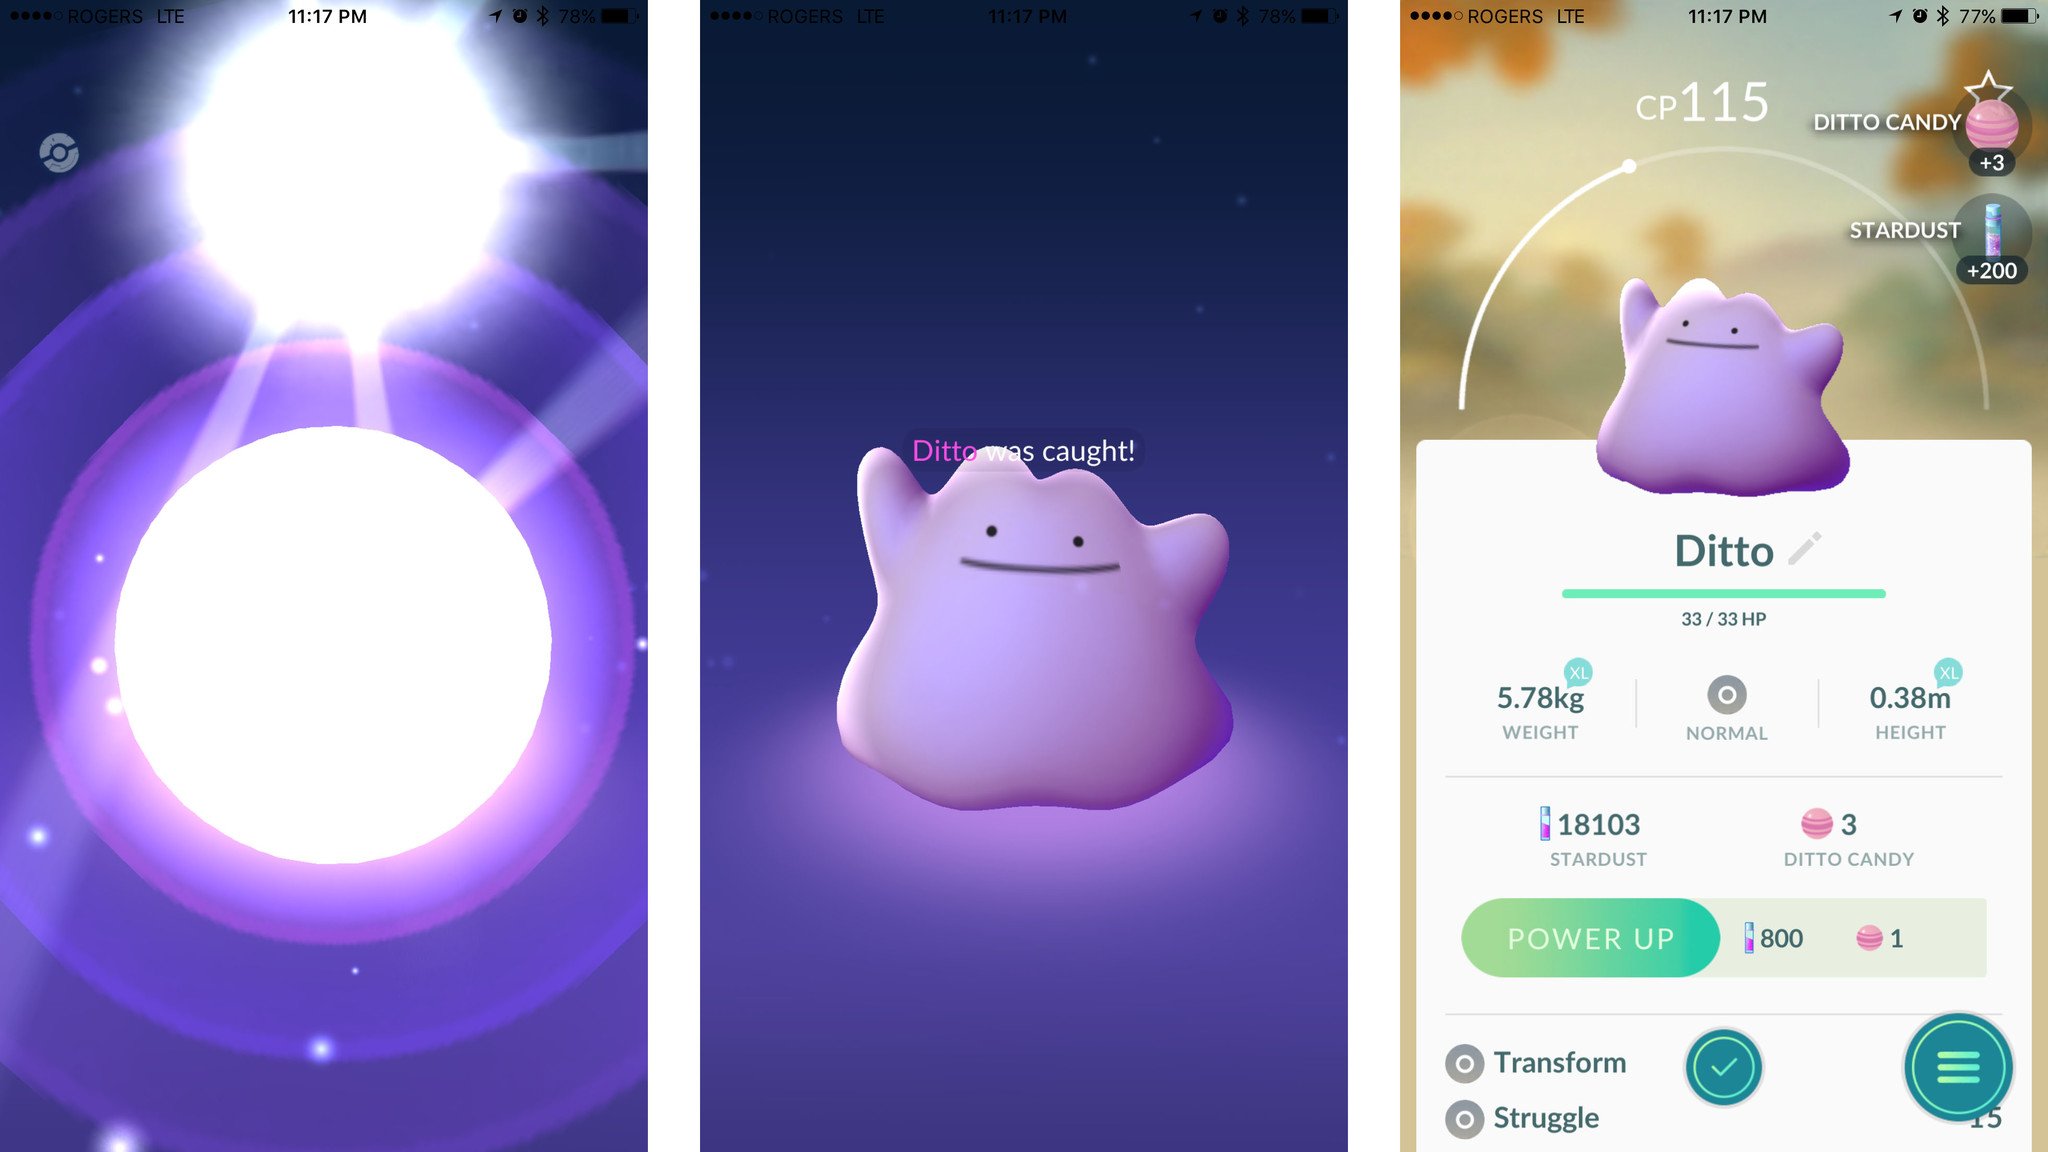 How to catch Ditto in Pokémon Go April 